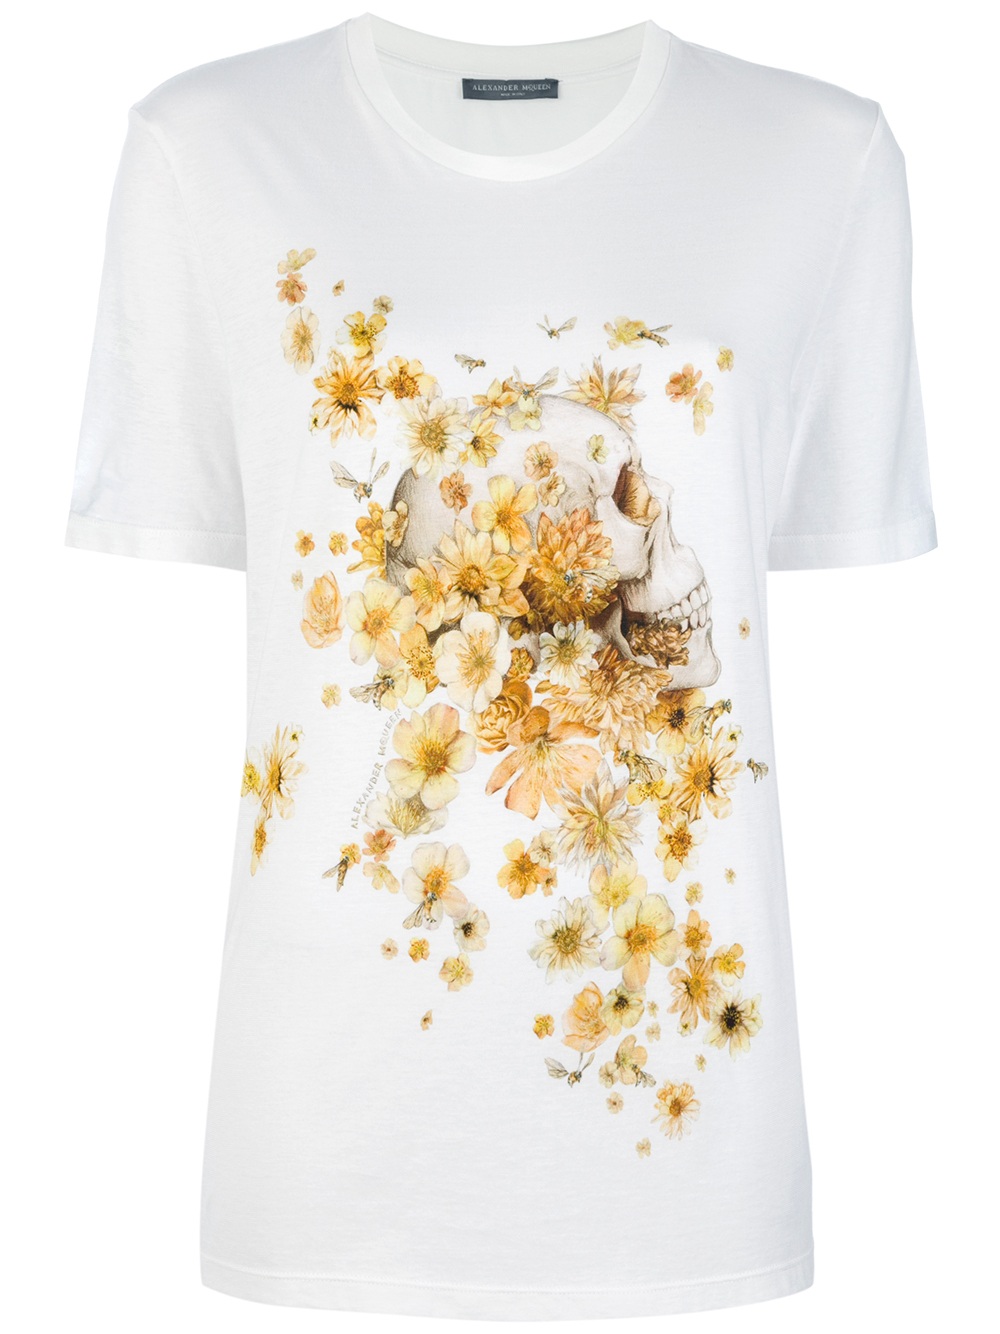 Alexander Mcqueen Floral Skull Print T-shirt in White (floral) | Lyst